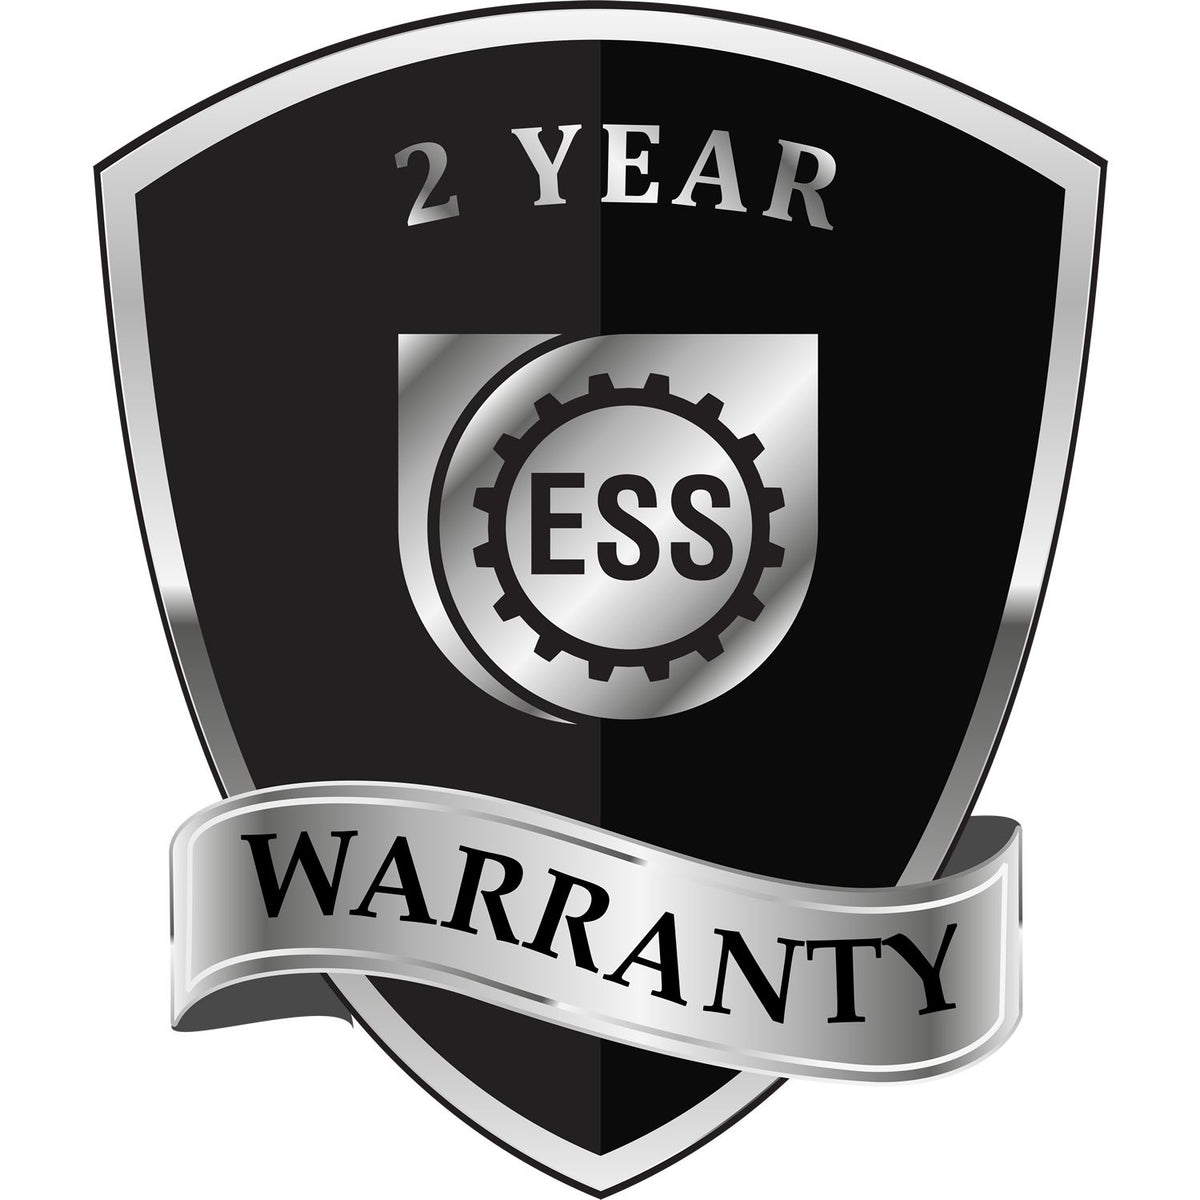 A badge or emblem showing a warranty icon for the Minnesota Engineer Desk Seal